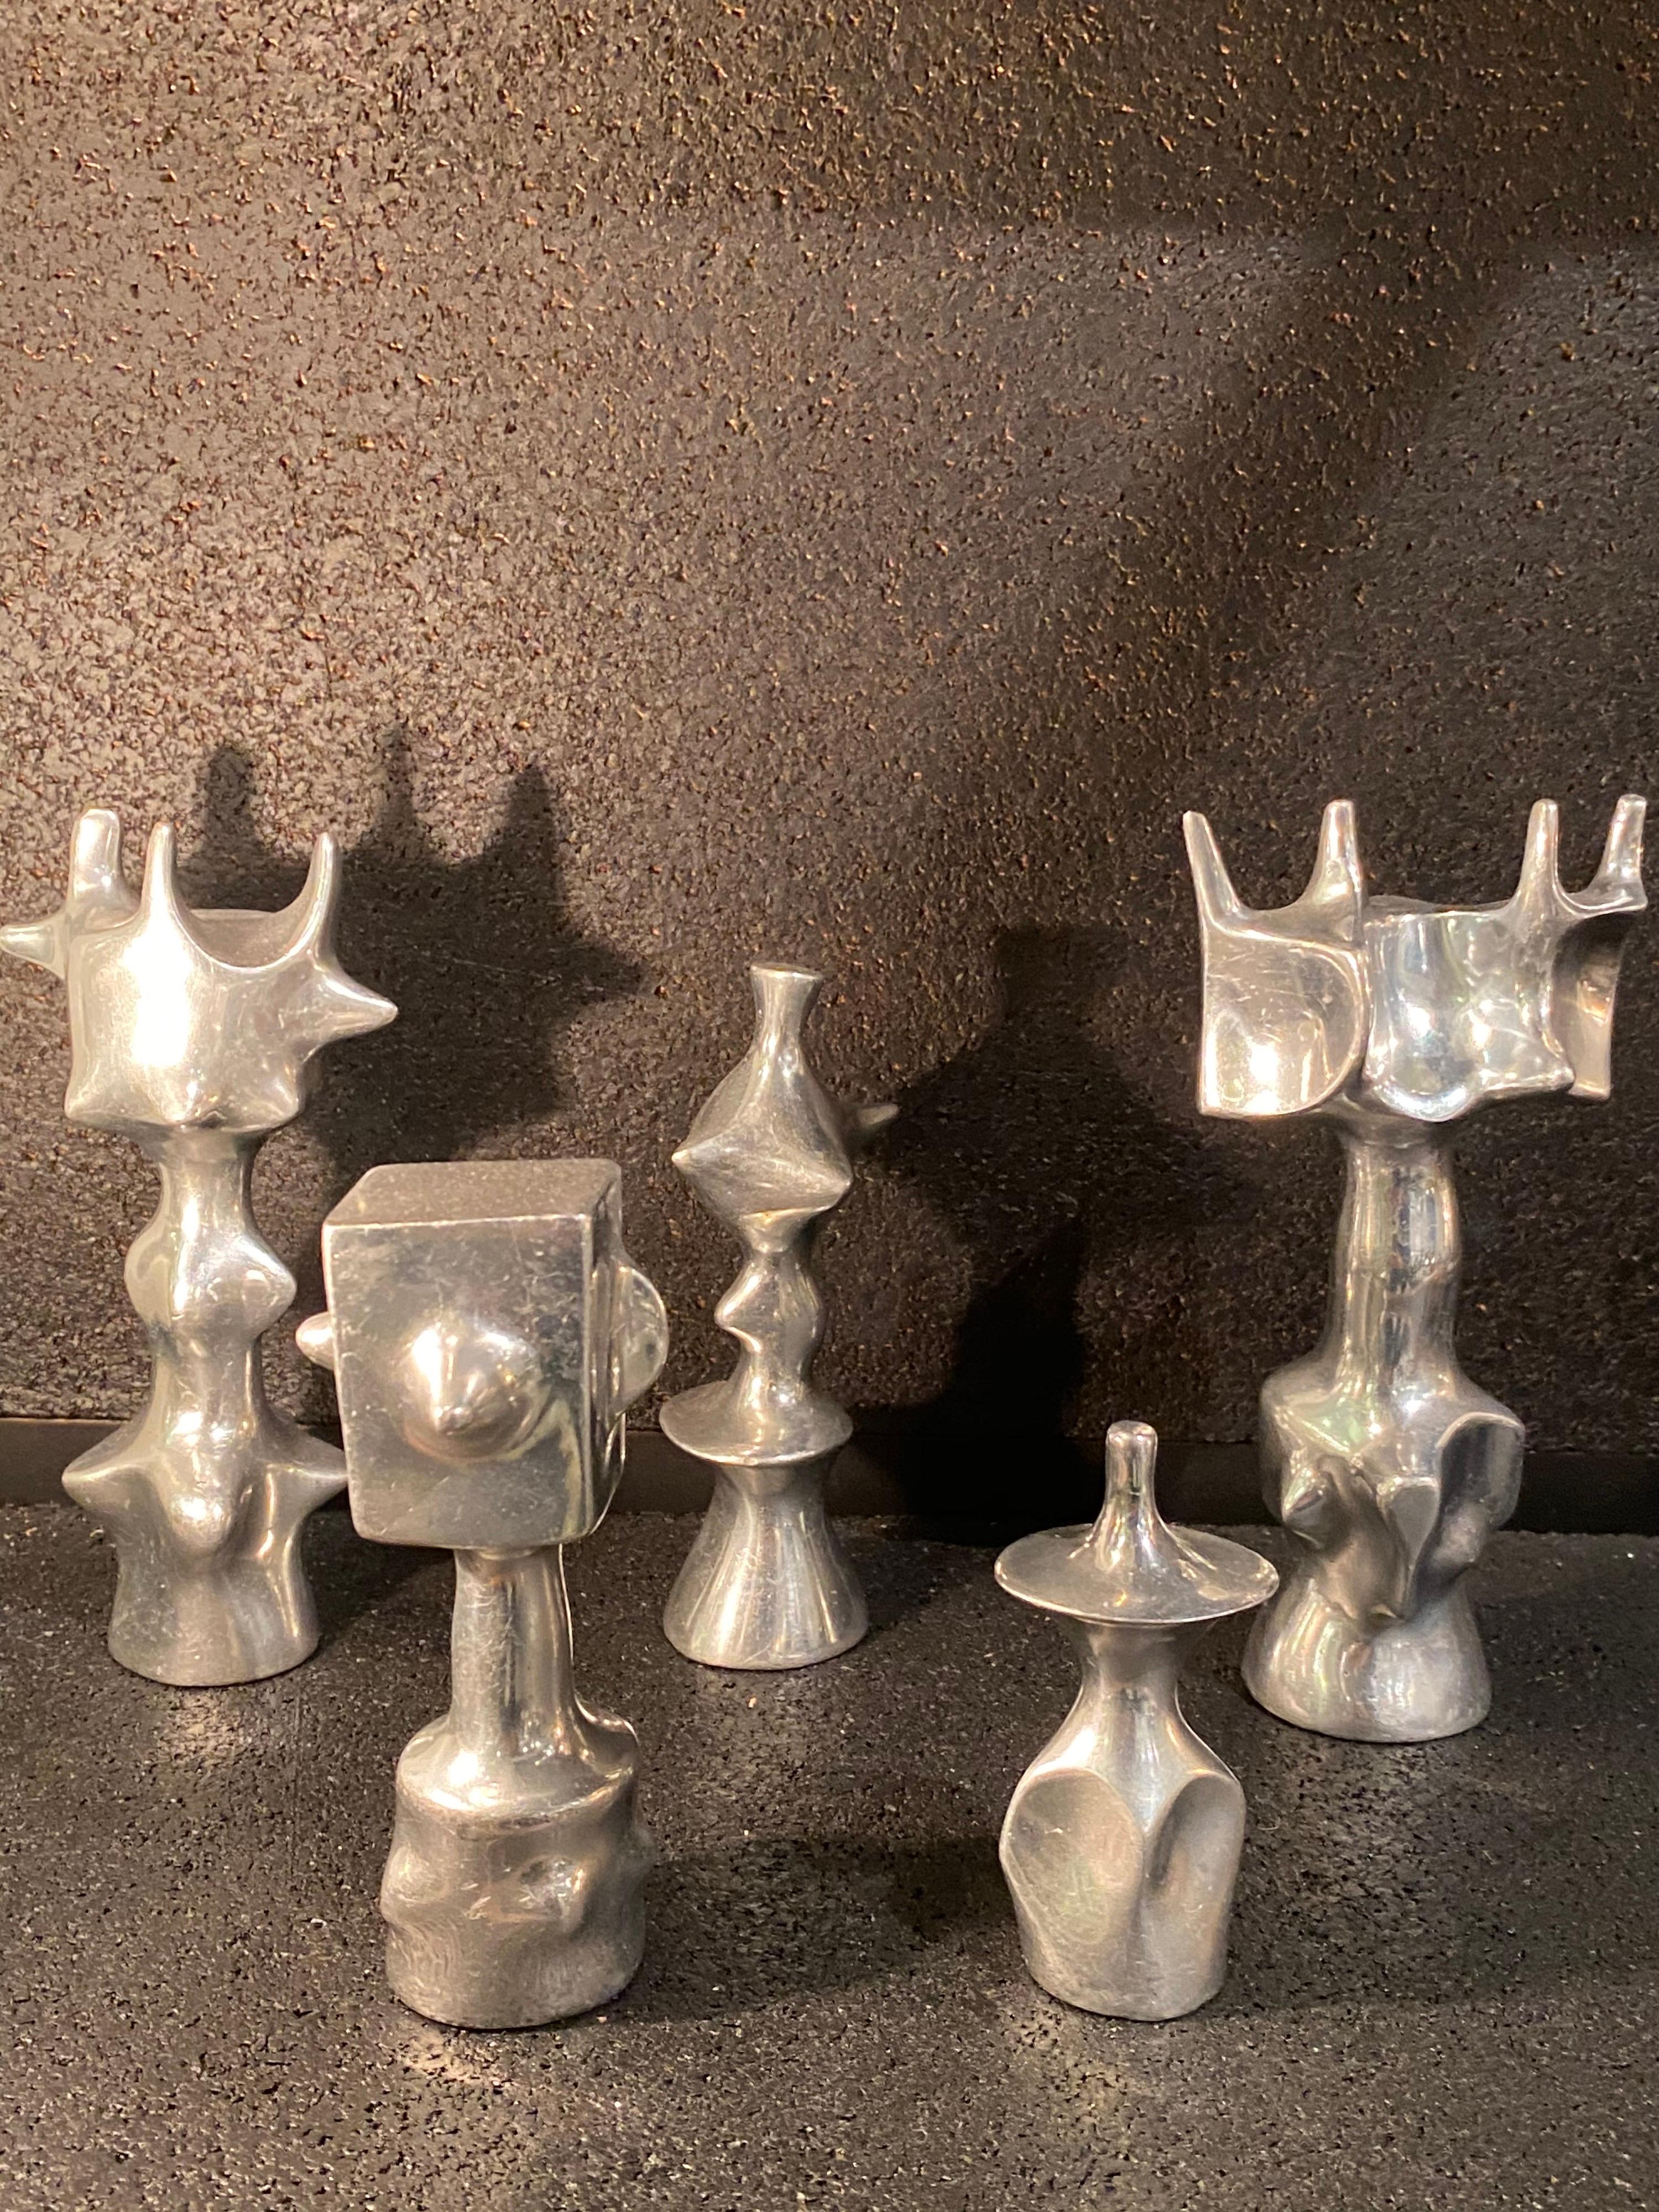 Set of Victor Roman sculptures in aluminum
Unique pieces 
circa 1970
Great condition
Dimensions are for the tallest one.